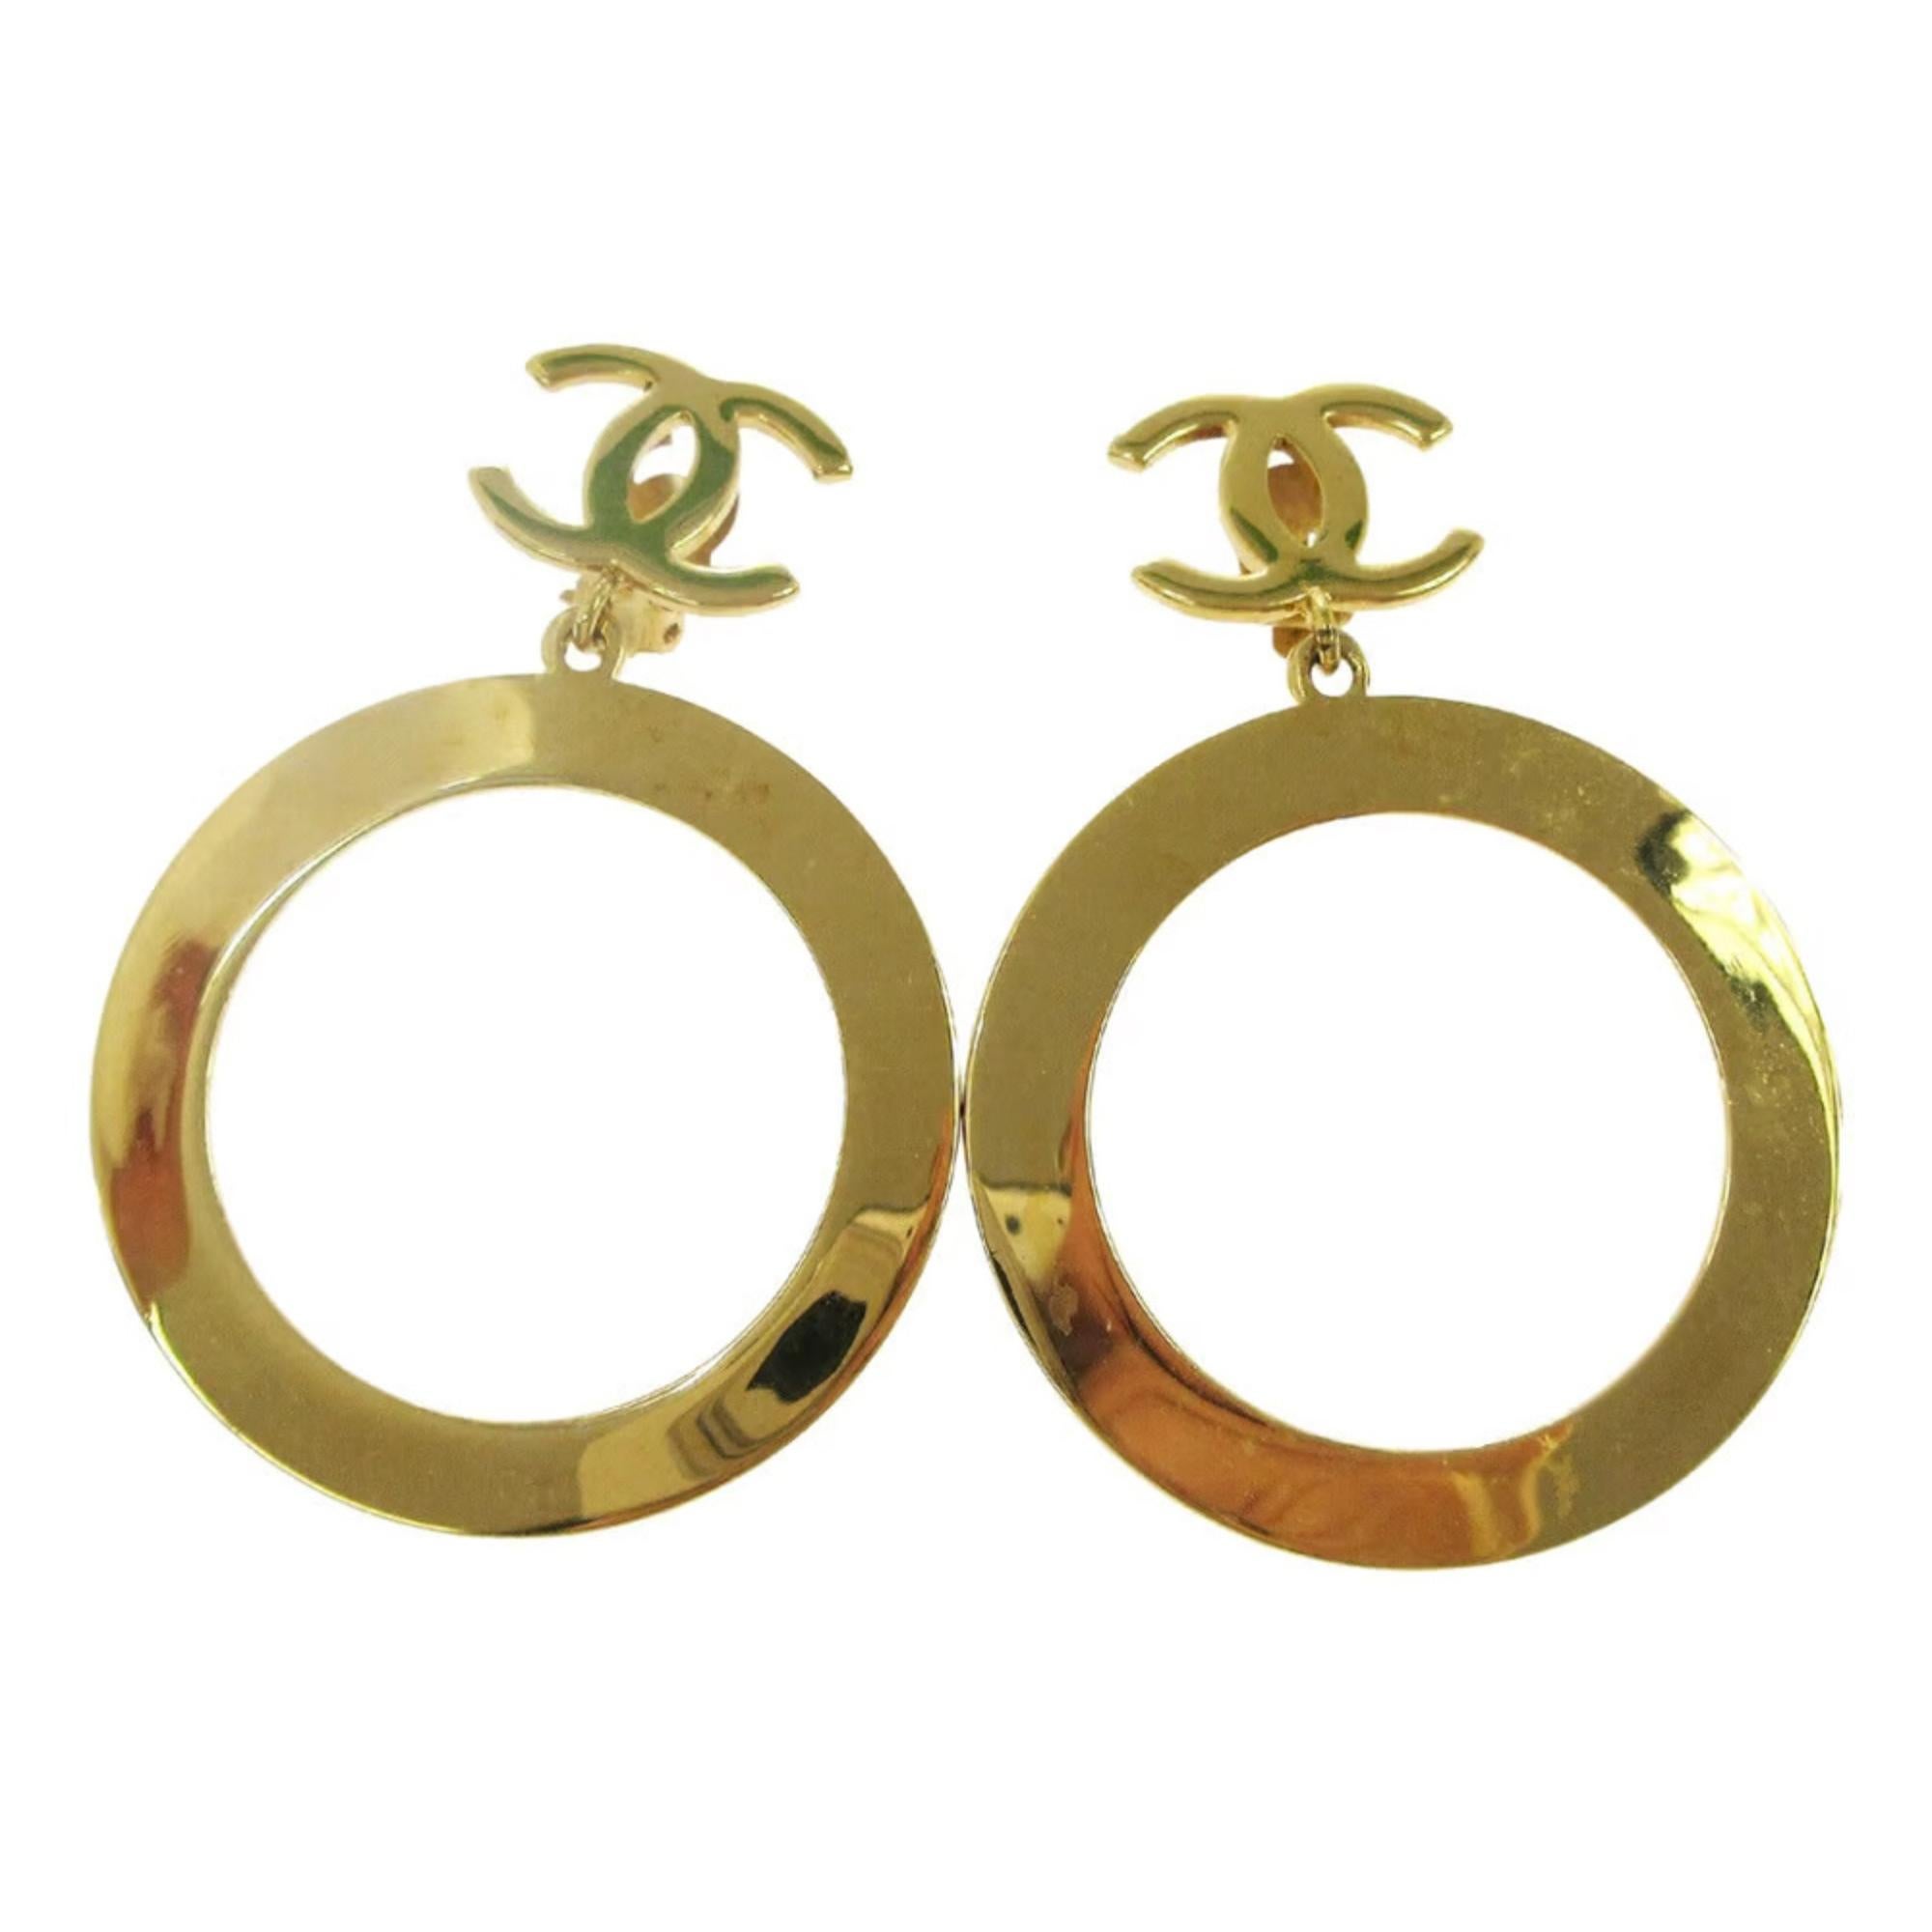 This is an authentic pair of Chanel CC hoop clip on earrings in gold tone. These chic earrings feature large gold hoops suspended from a classic CC logo. 

Color: Gold
Material: Metal
Marks: Chanel logo on backside
Clasp Style: Clip on